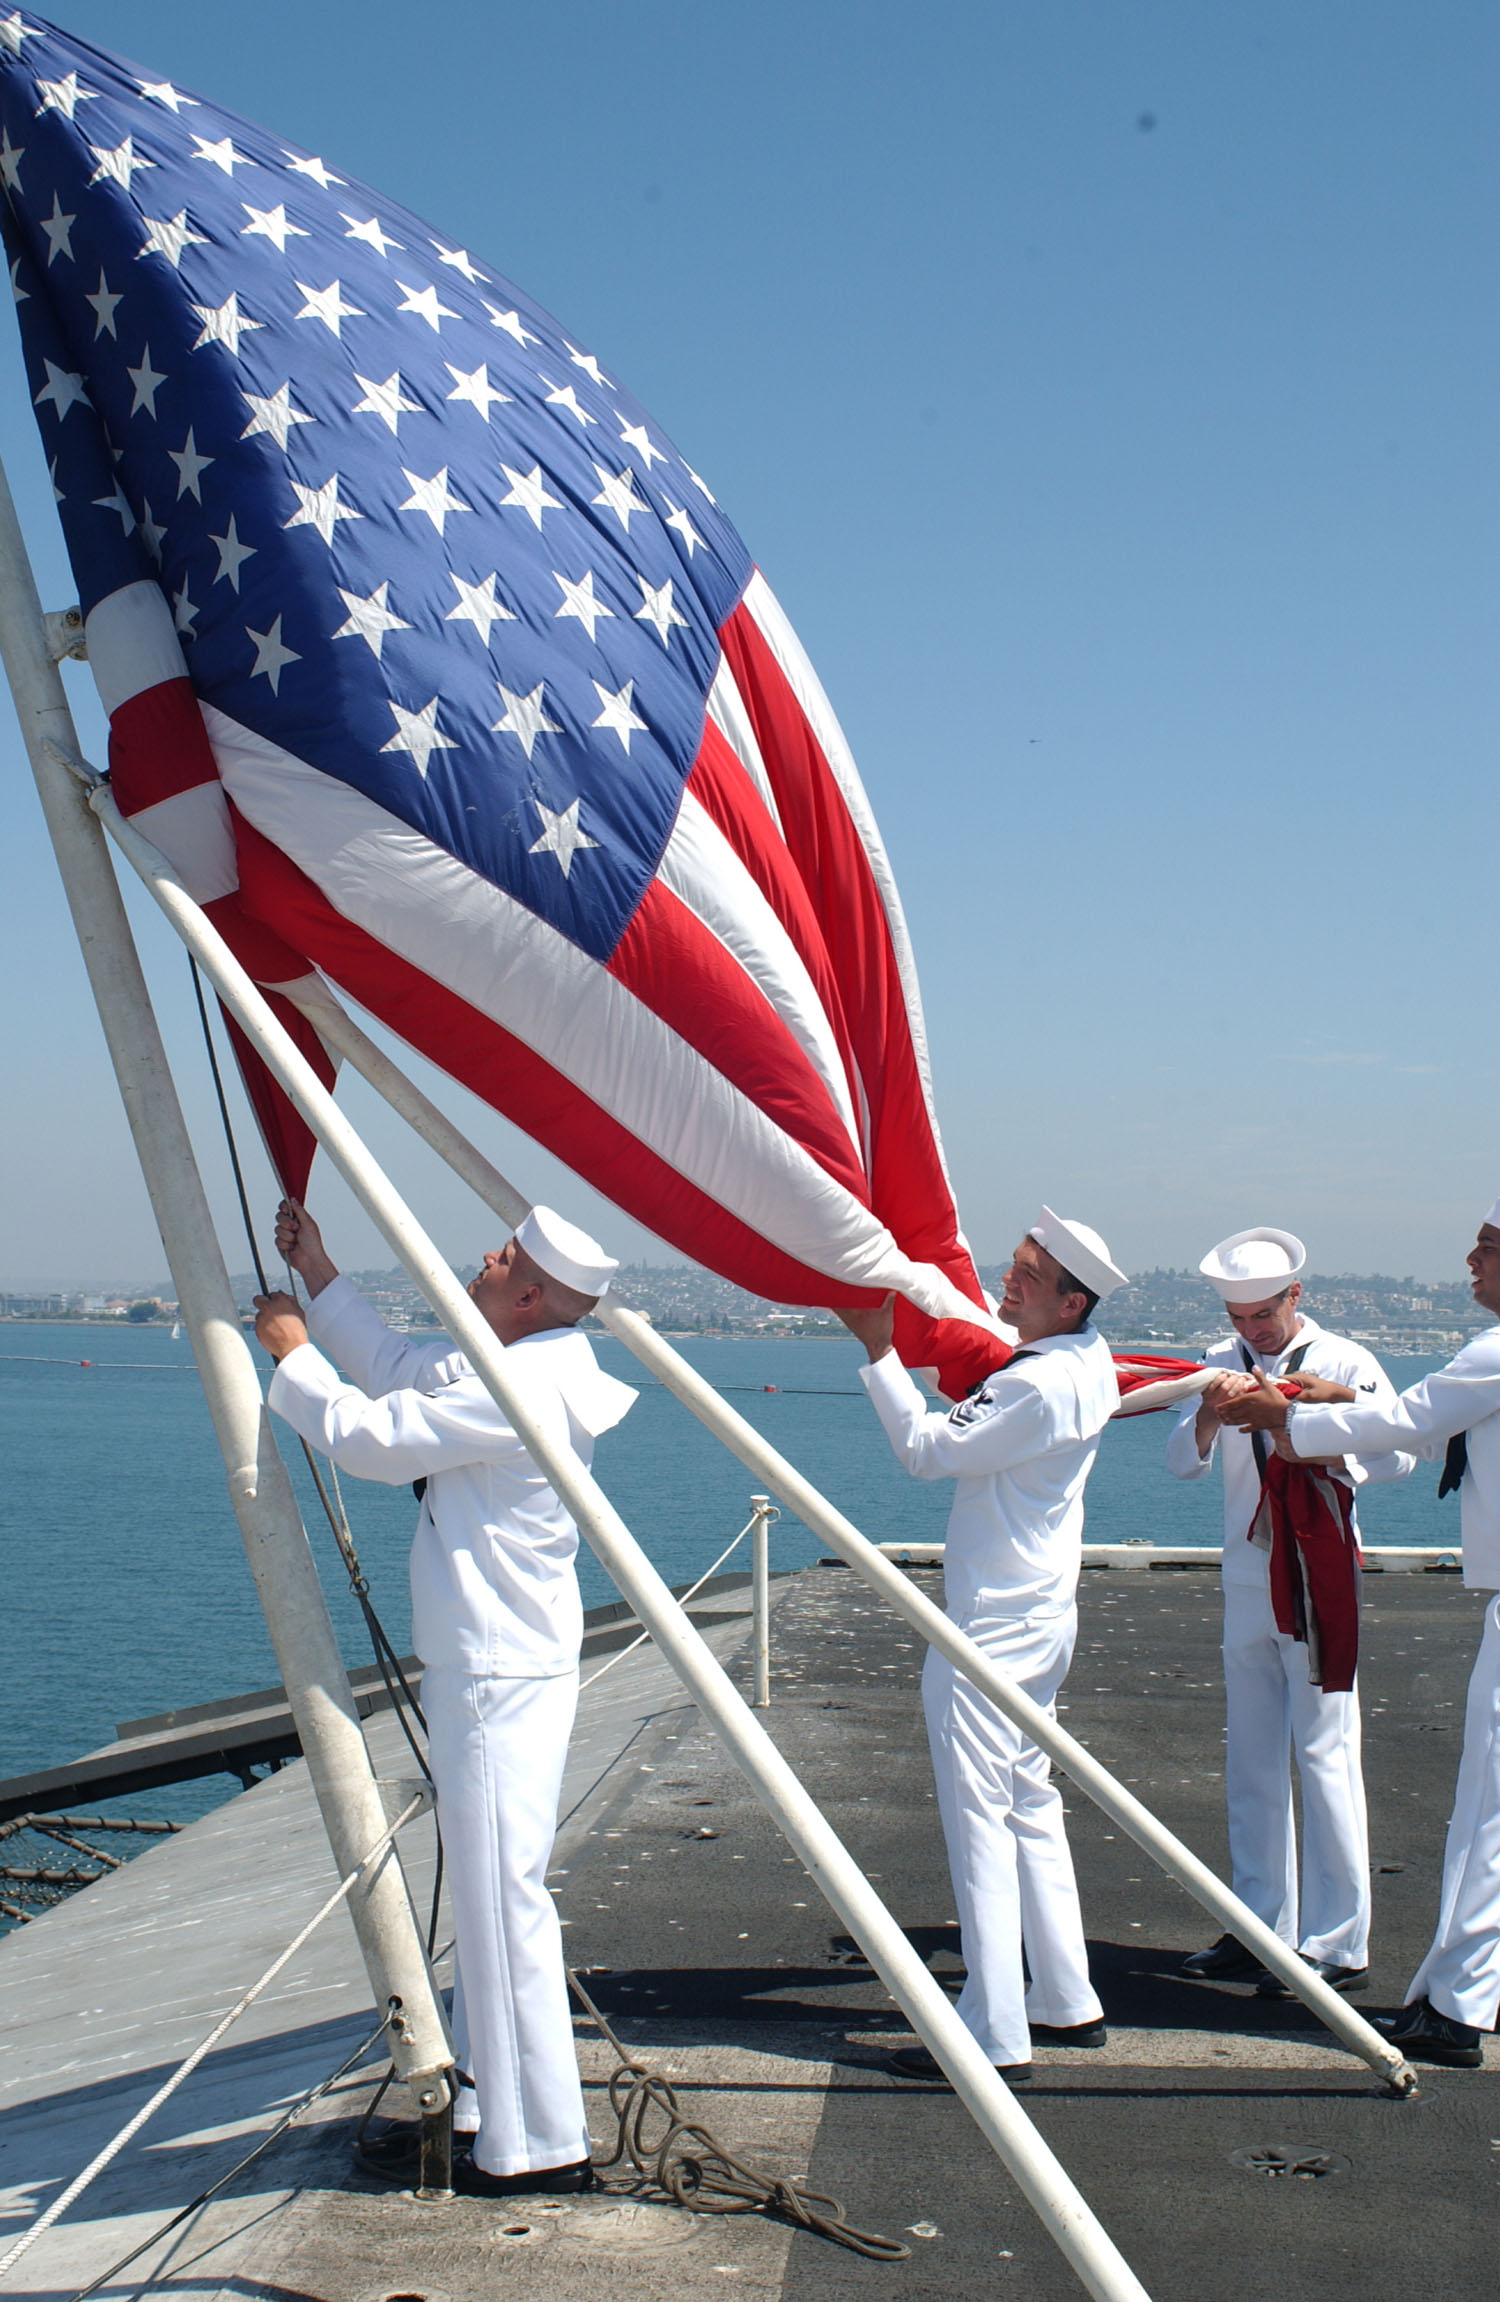 US Navy 030807-N-1356A-002 Sailors aboard USS Constellation (CV 64) lower the colors for the last time during the ships decommissioning ceremony